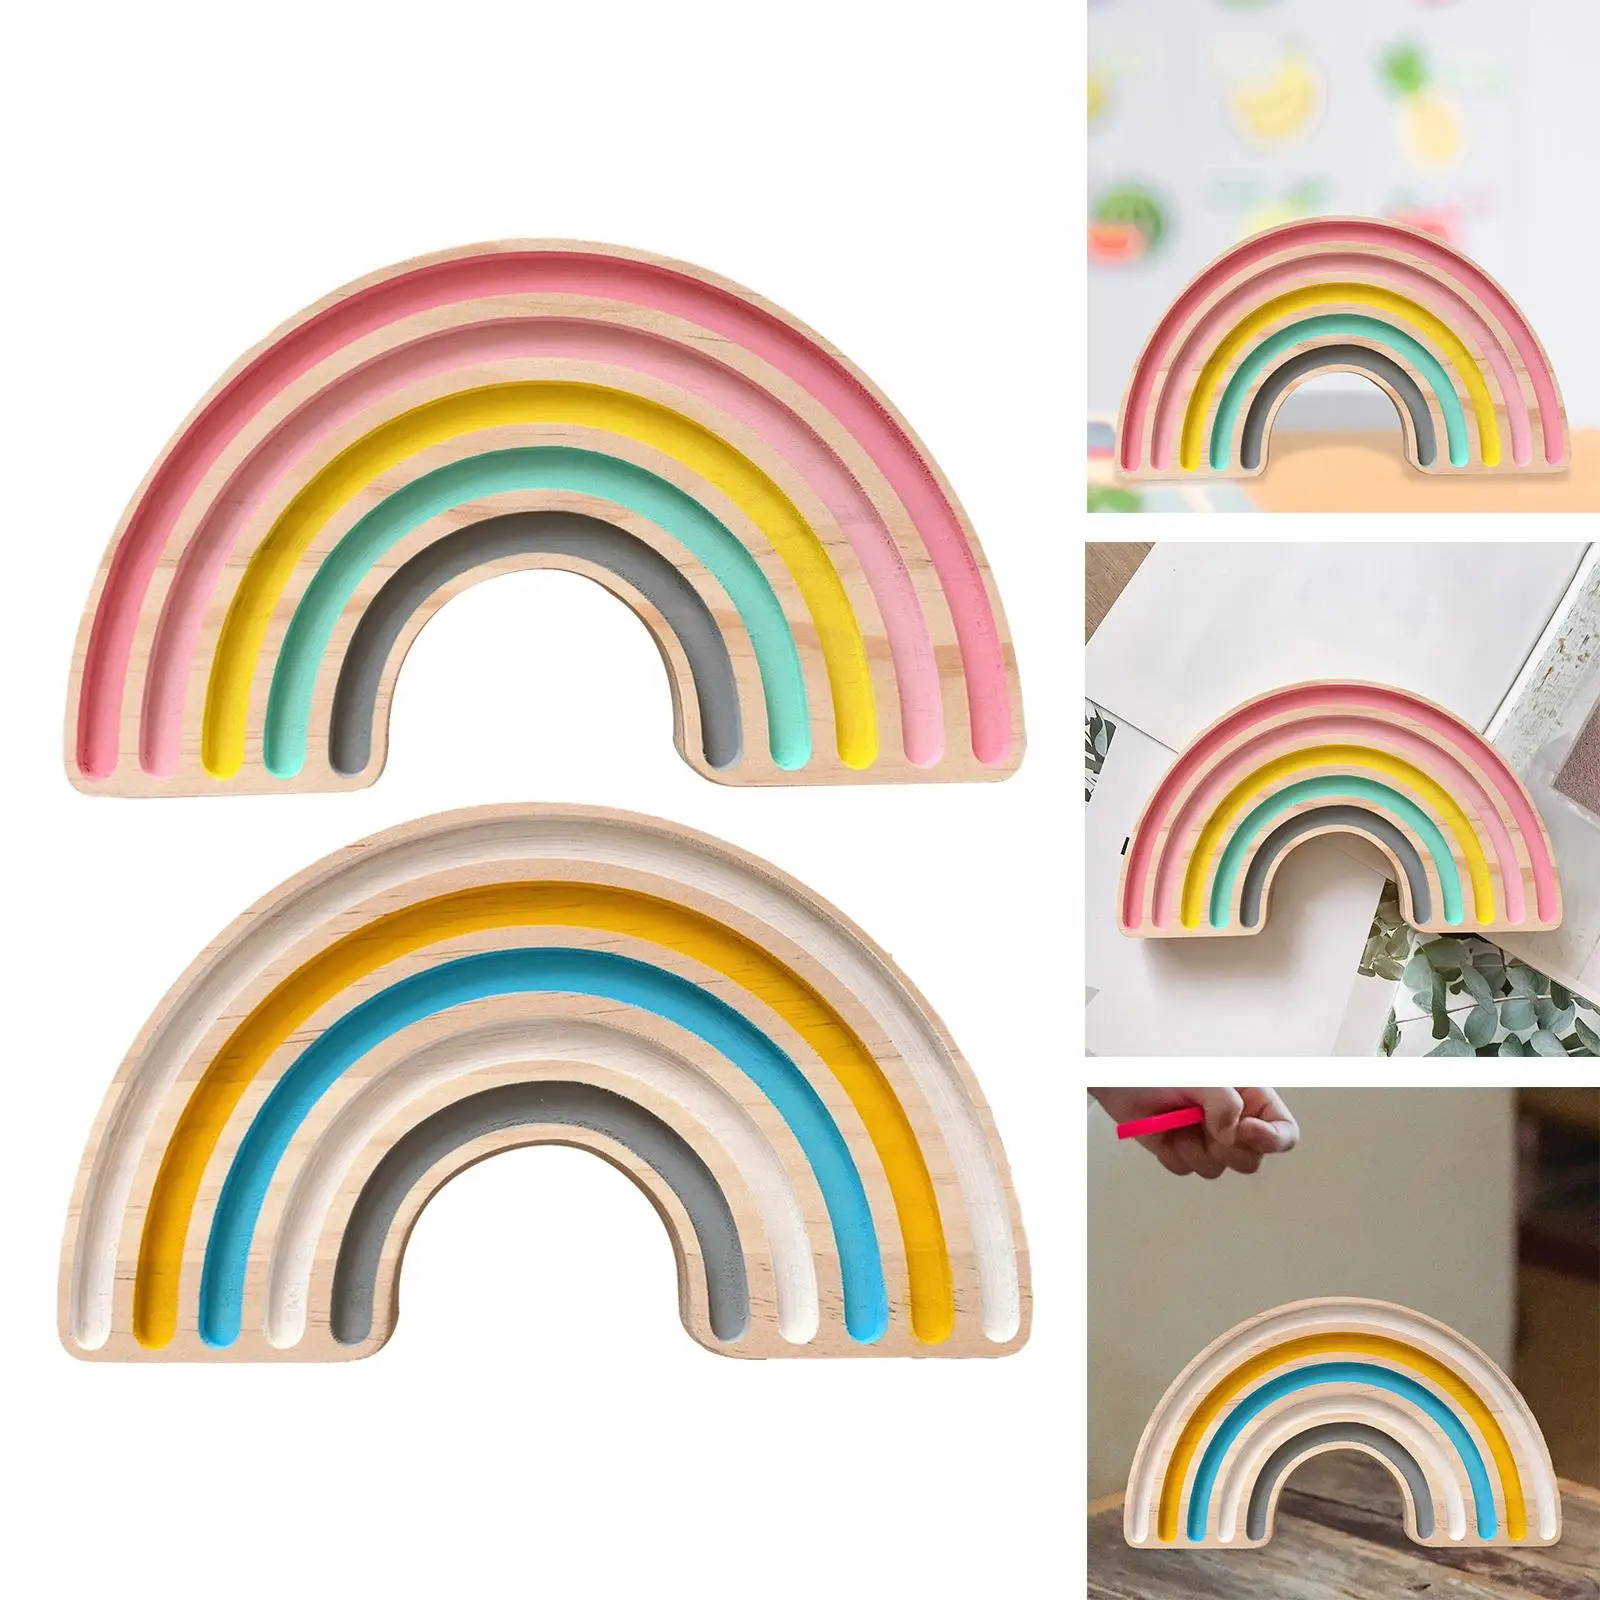 Handmade Wooden Rainbow Board Ornament Block Stacking Toy Creative Craft Decorative for Cafe Bedroom Decoration Playroom Desk